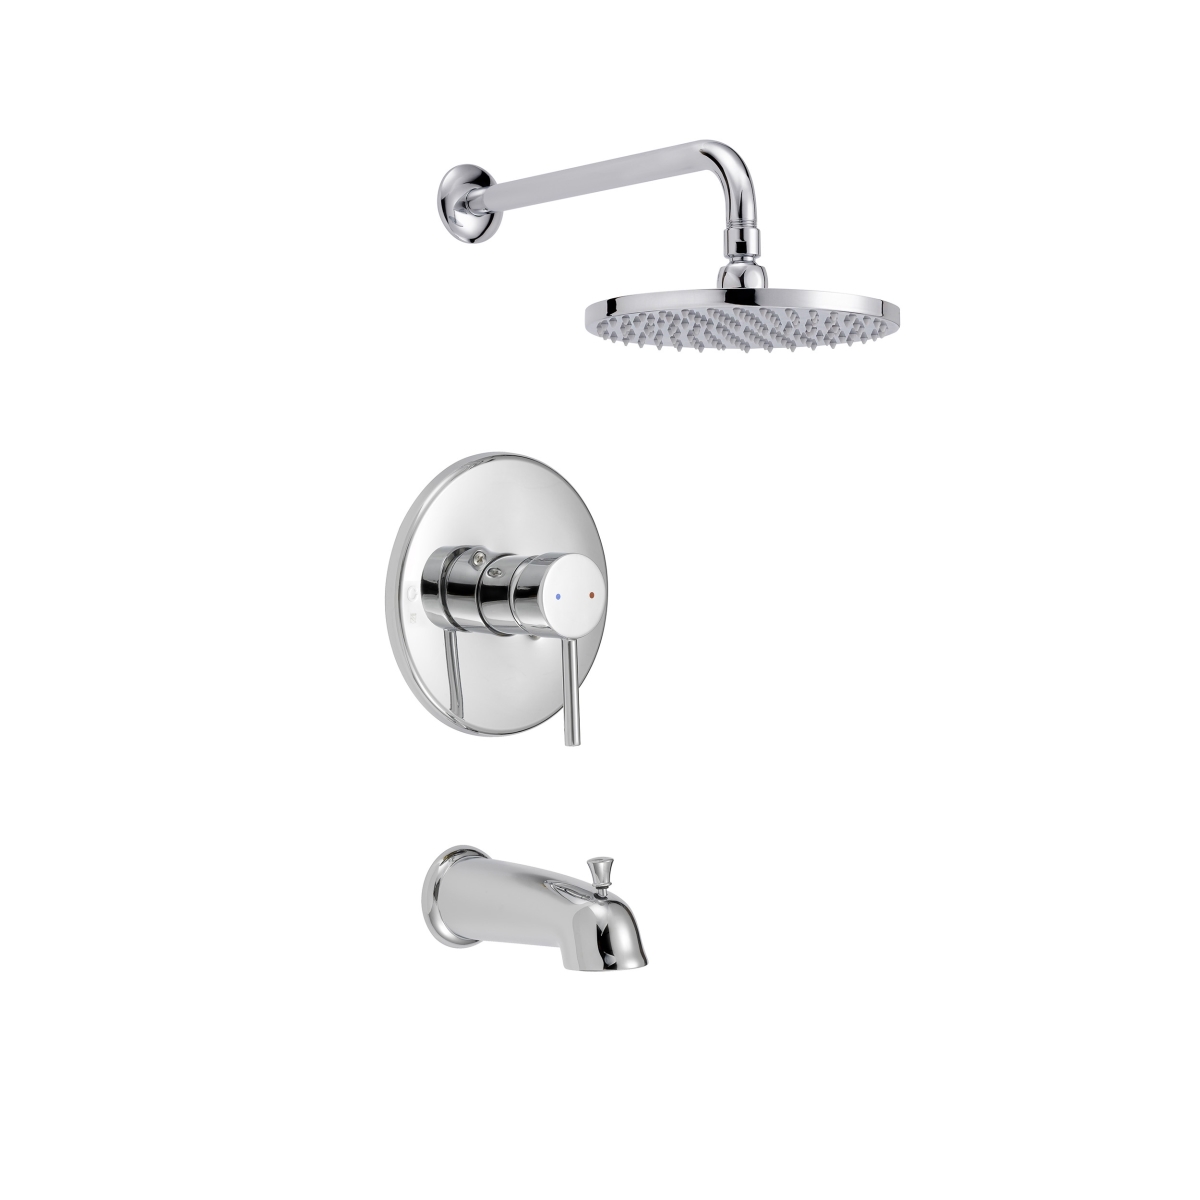 Brc3341c Tub And Shower Trim Package With Single Lever Handle Chrome